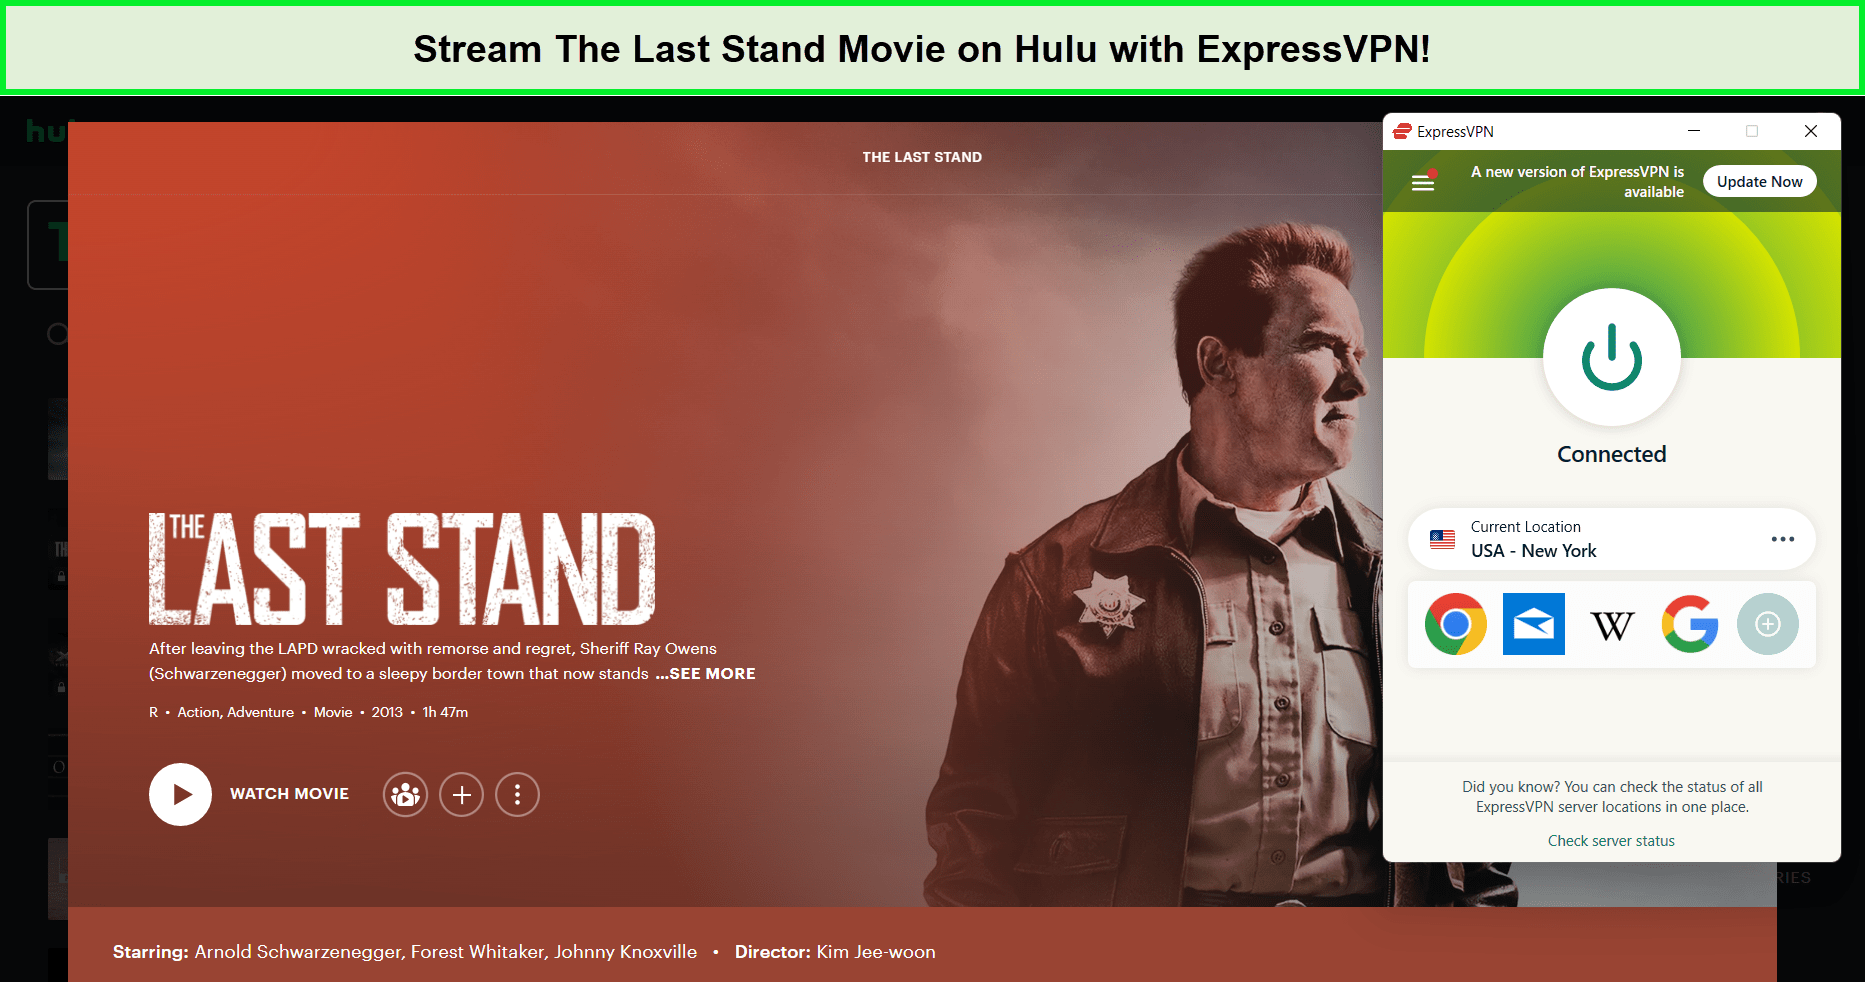 With-ExpressVPN-Watch-The-Last-Stand-Movie-on-Hulu-outside-USA